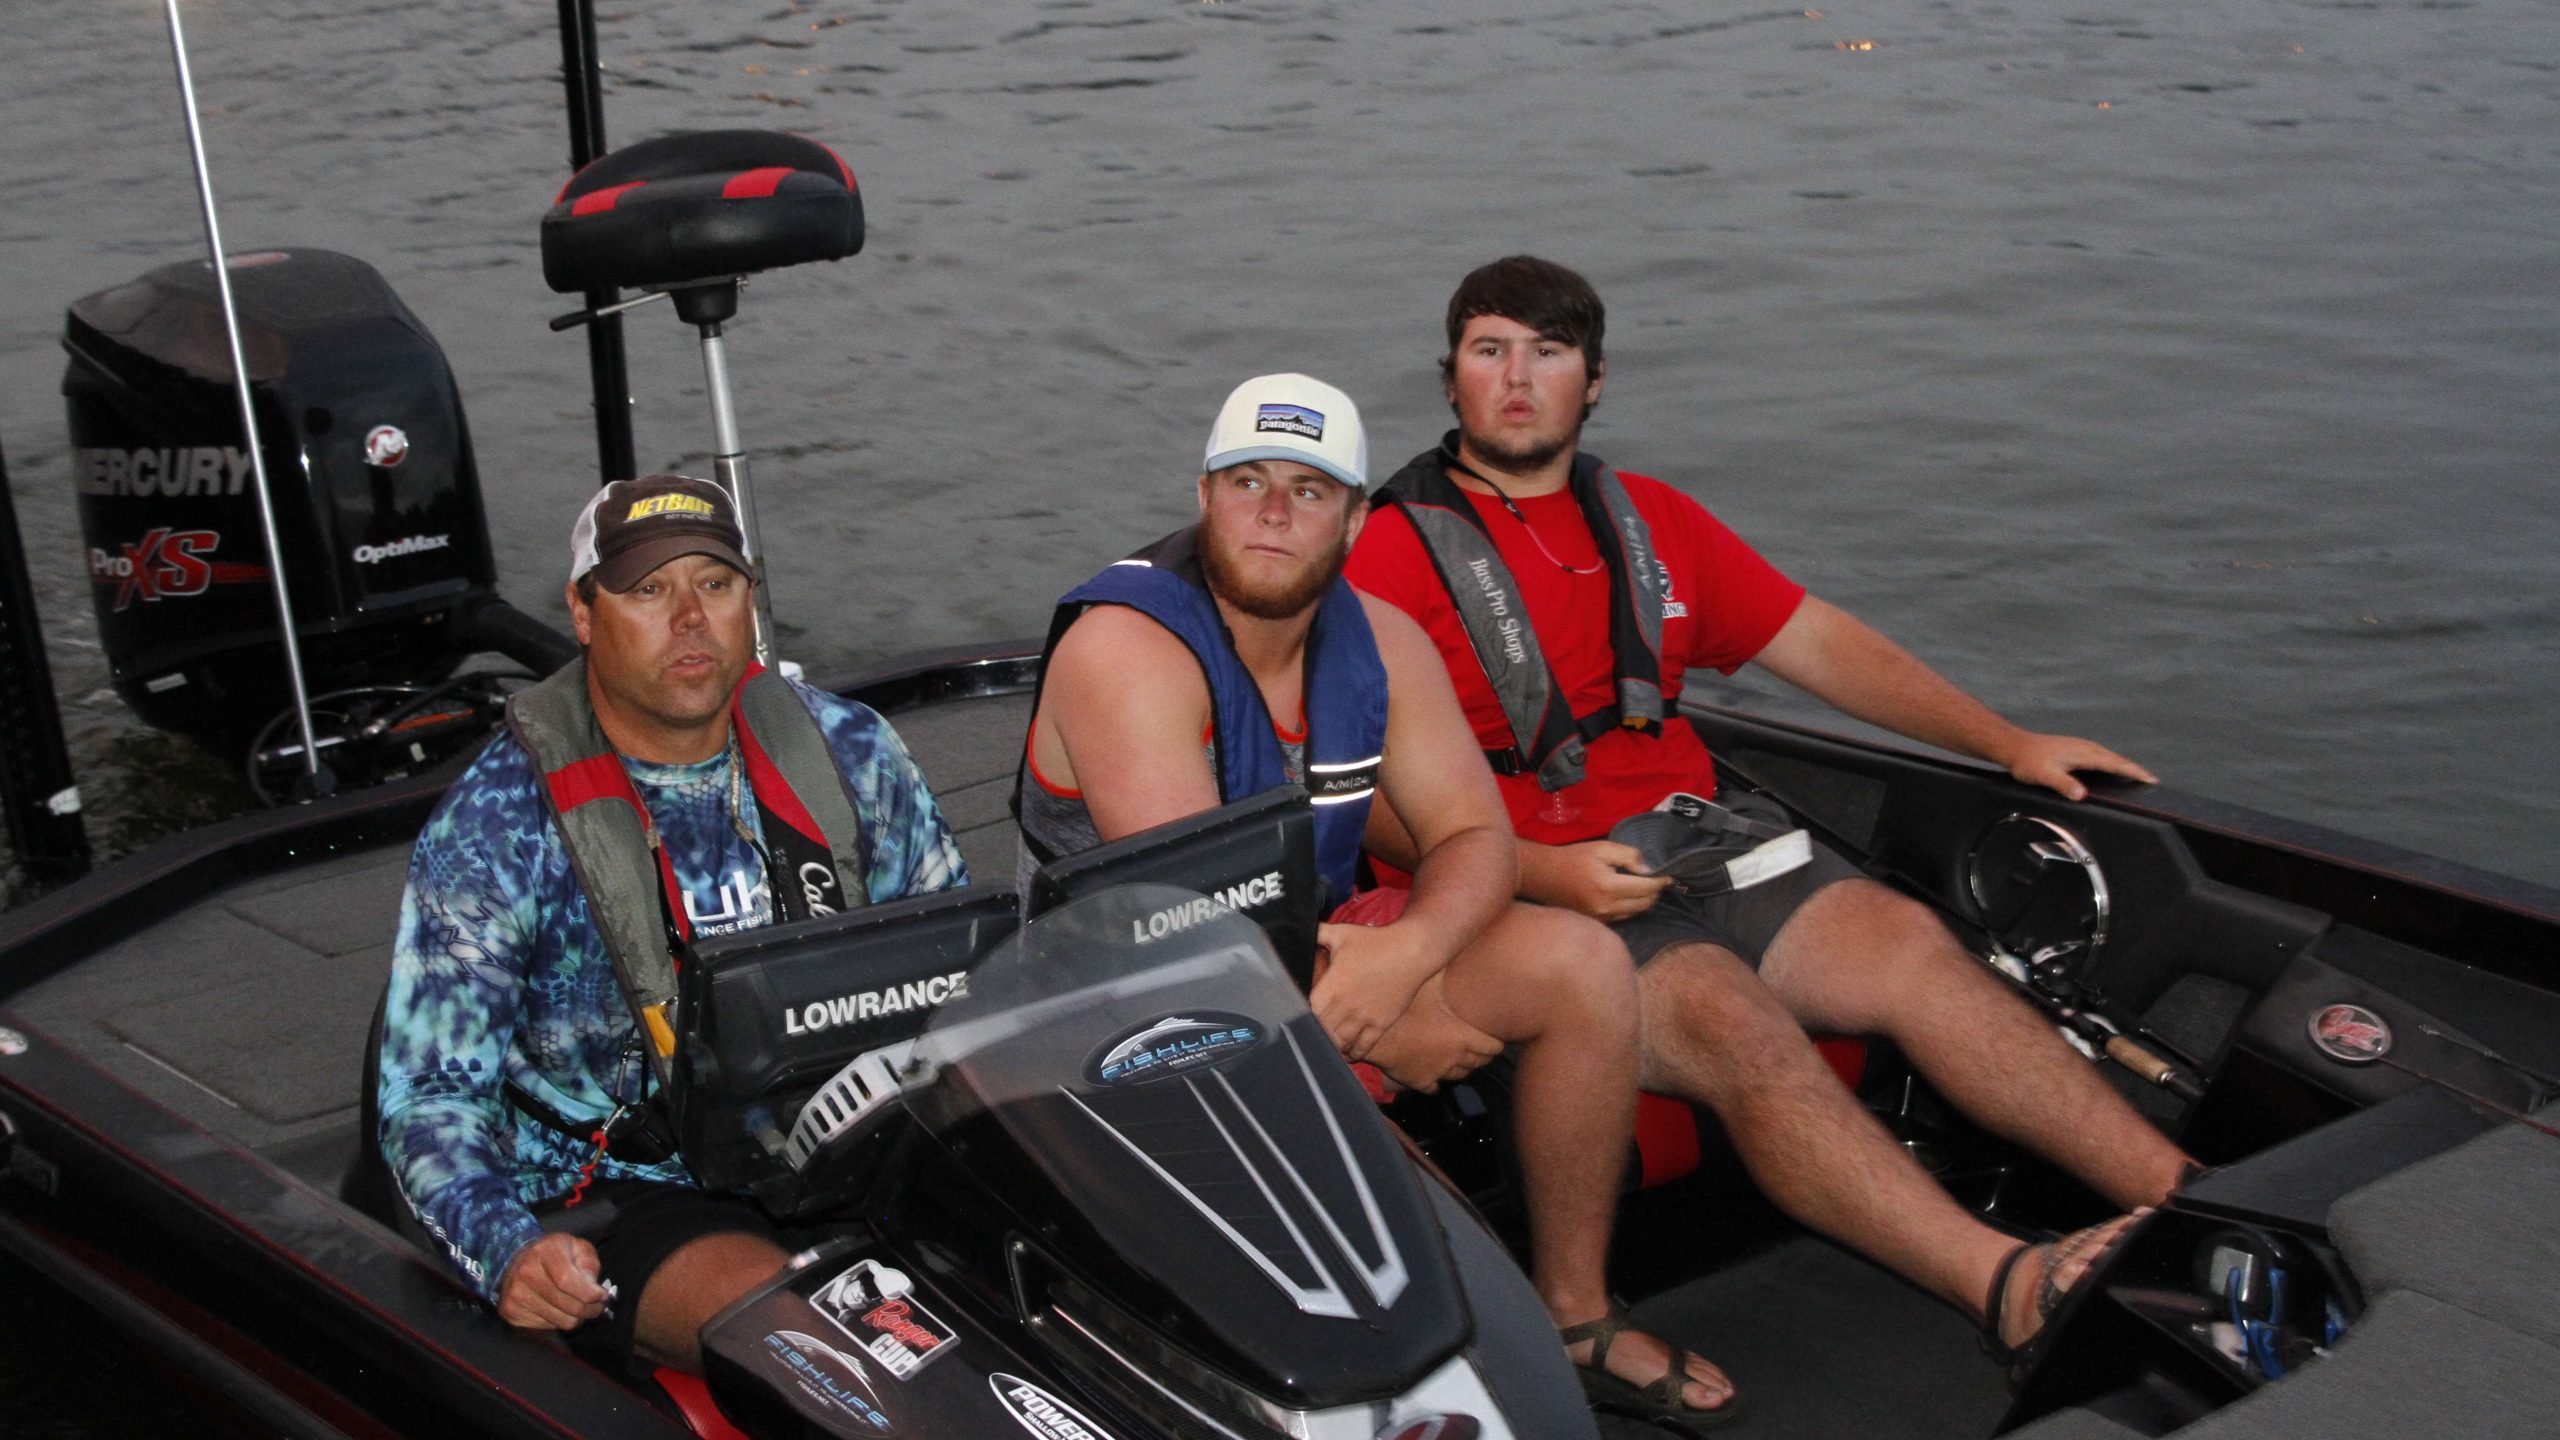 These guys mean business when it comes to bass fishing.